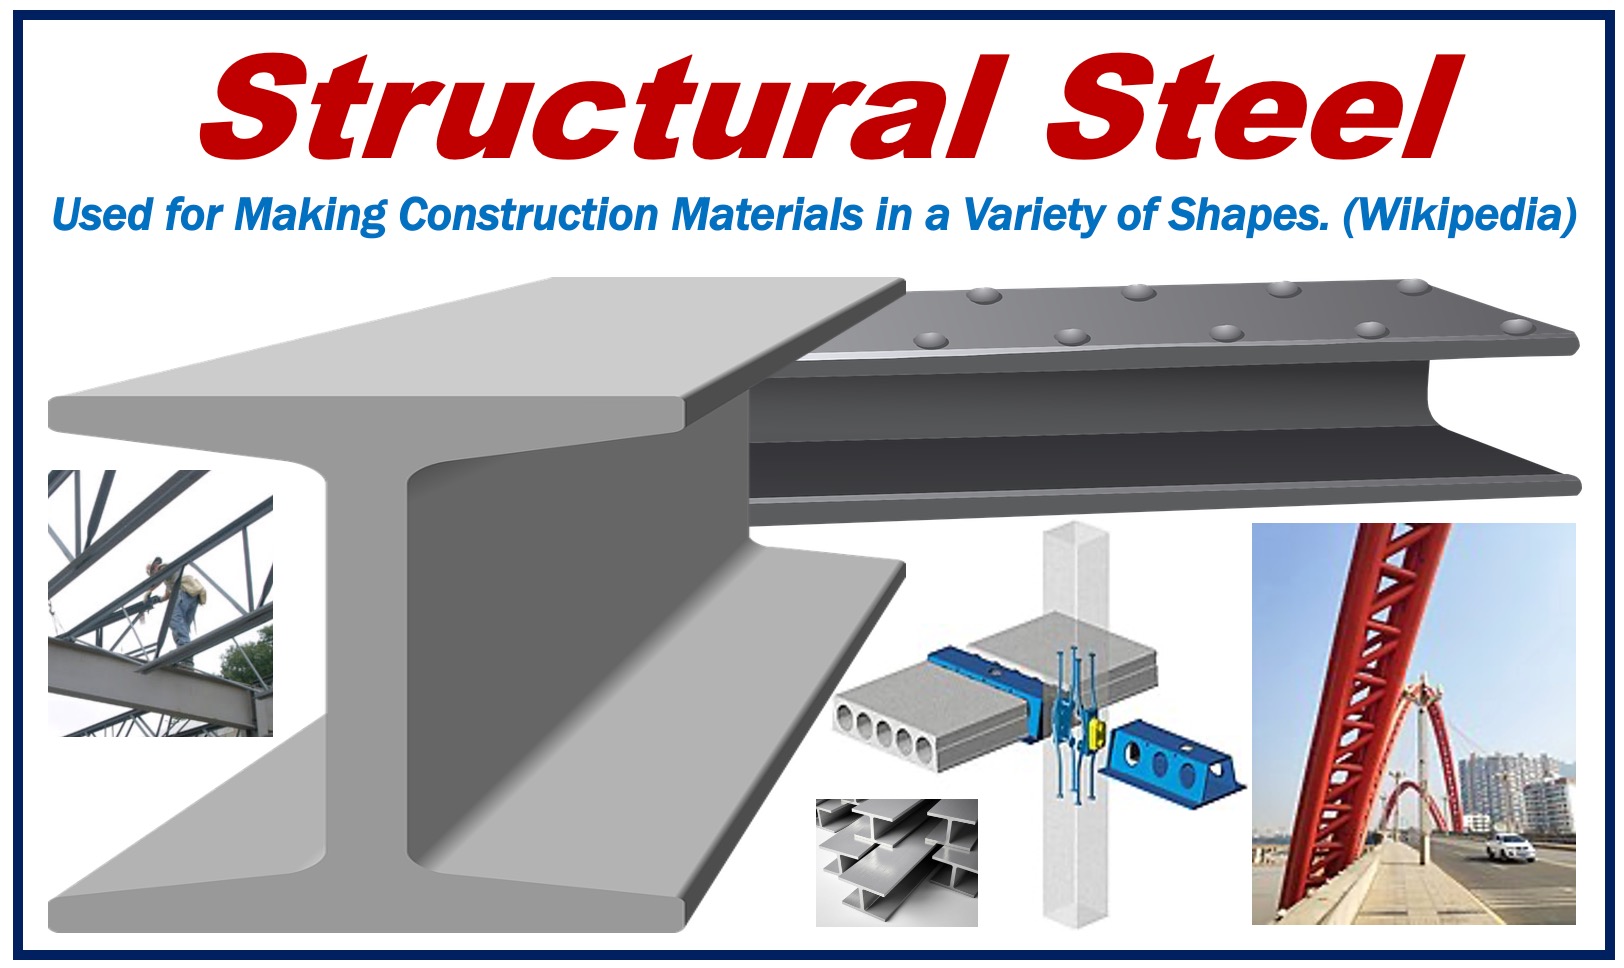 Structural Steel is a Wise Choice for Commercial Building